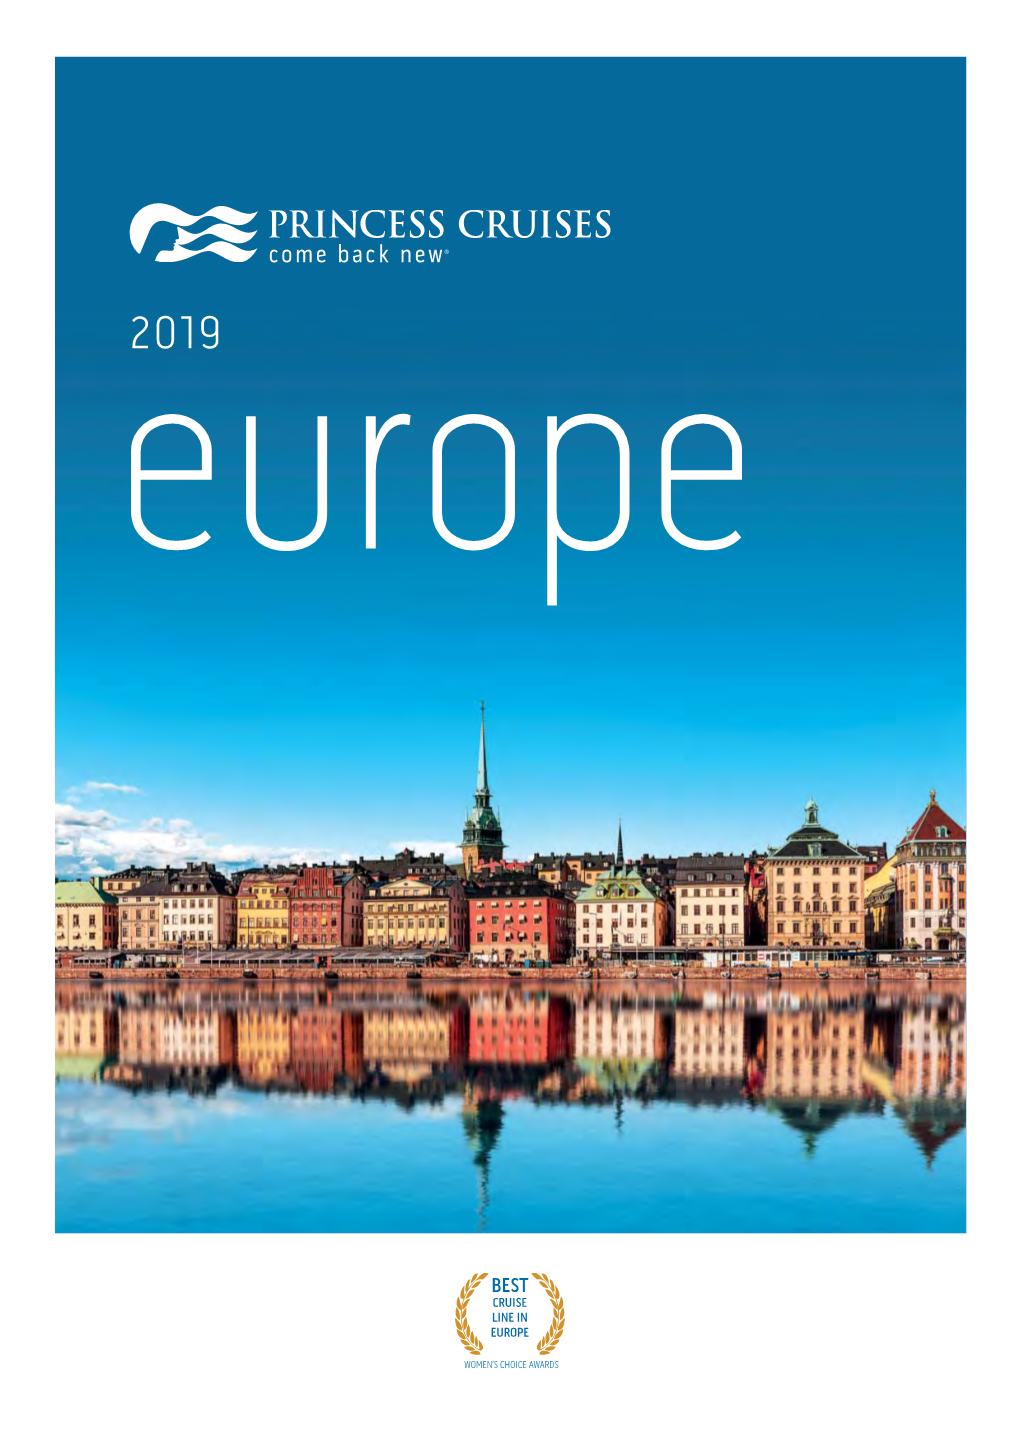 Cruise Line in Europe